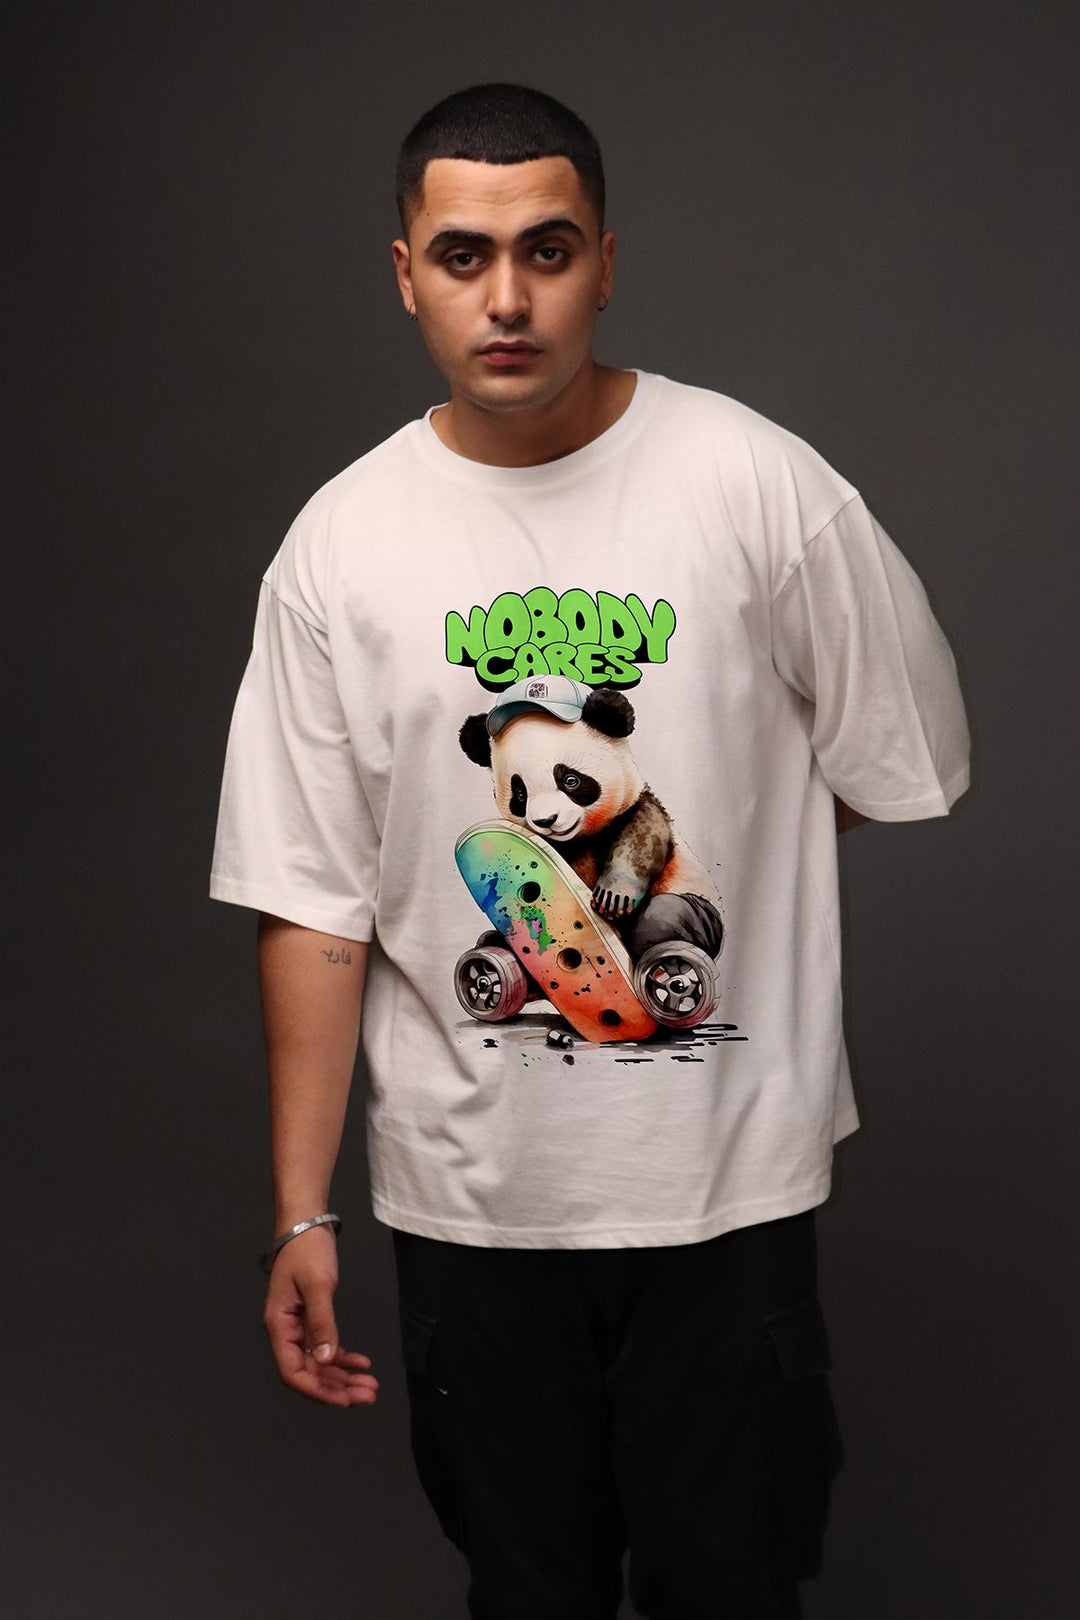 Printed Oversized Tee - MEN'S PRINTED OVER SIZE TEE#57